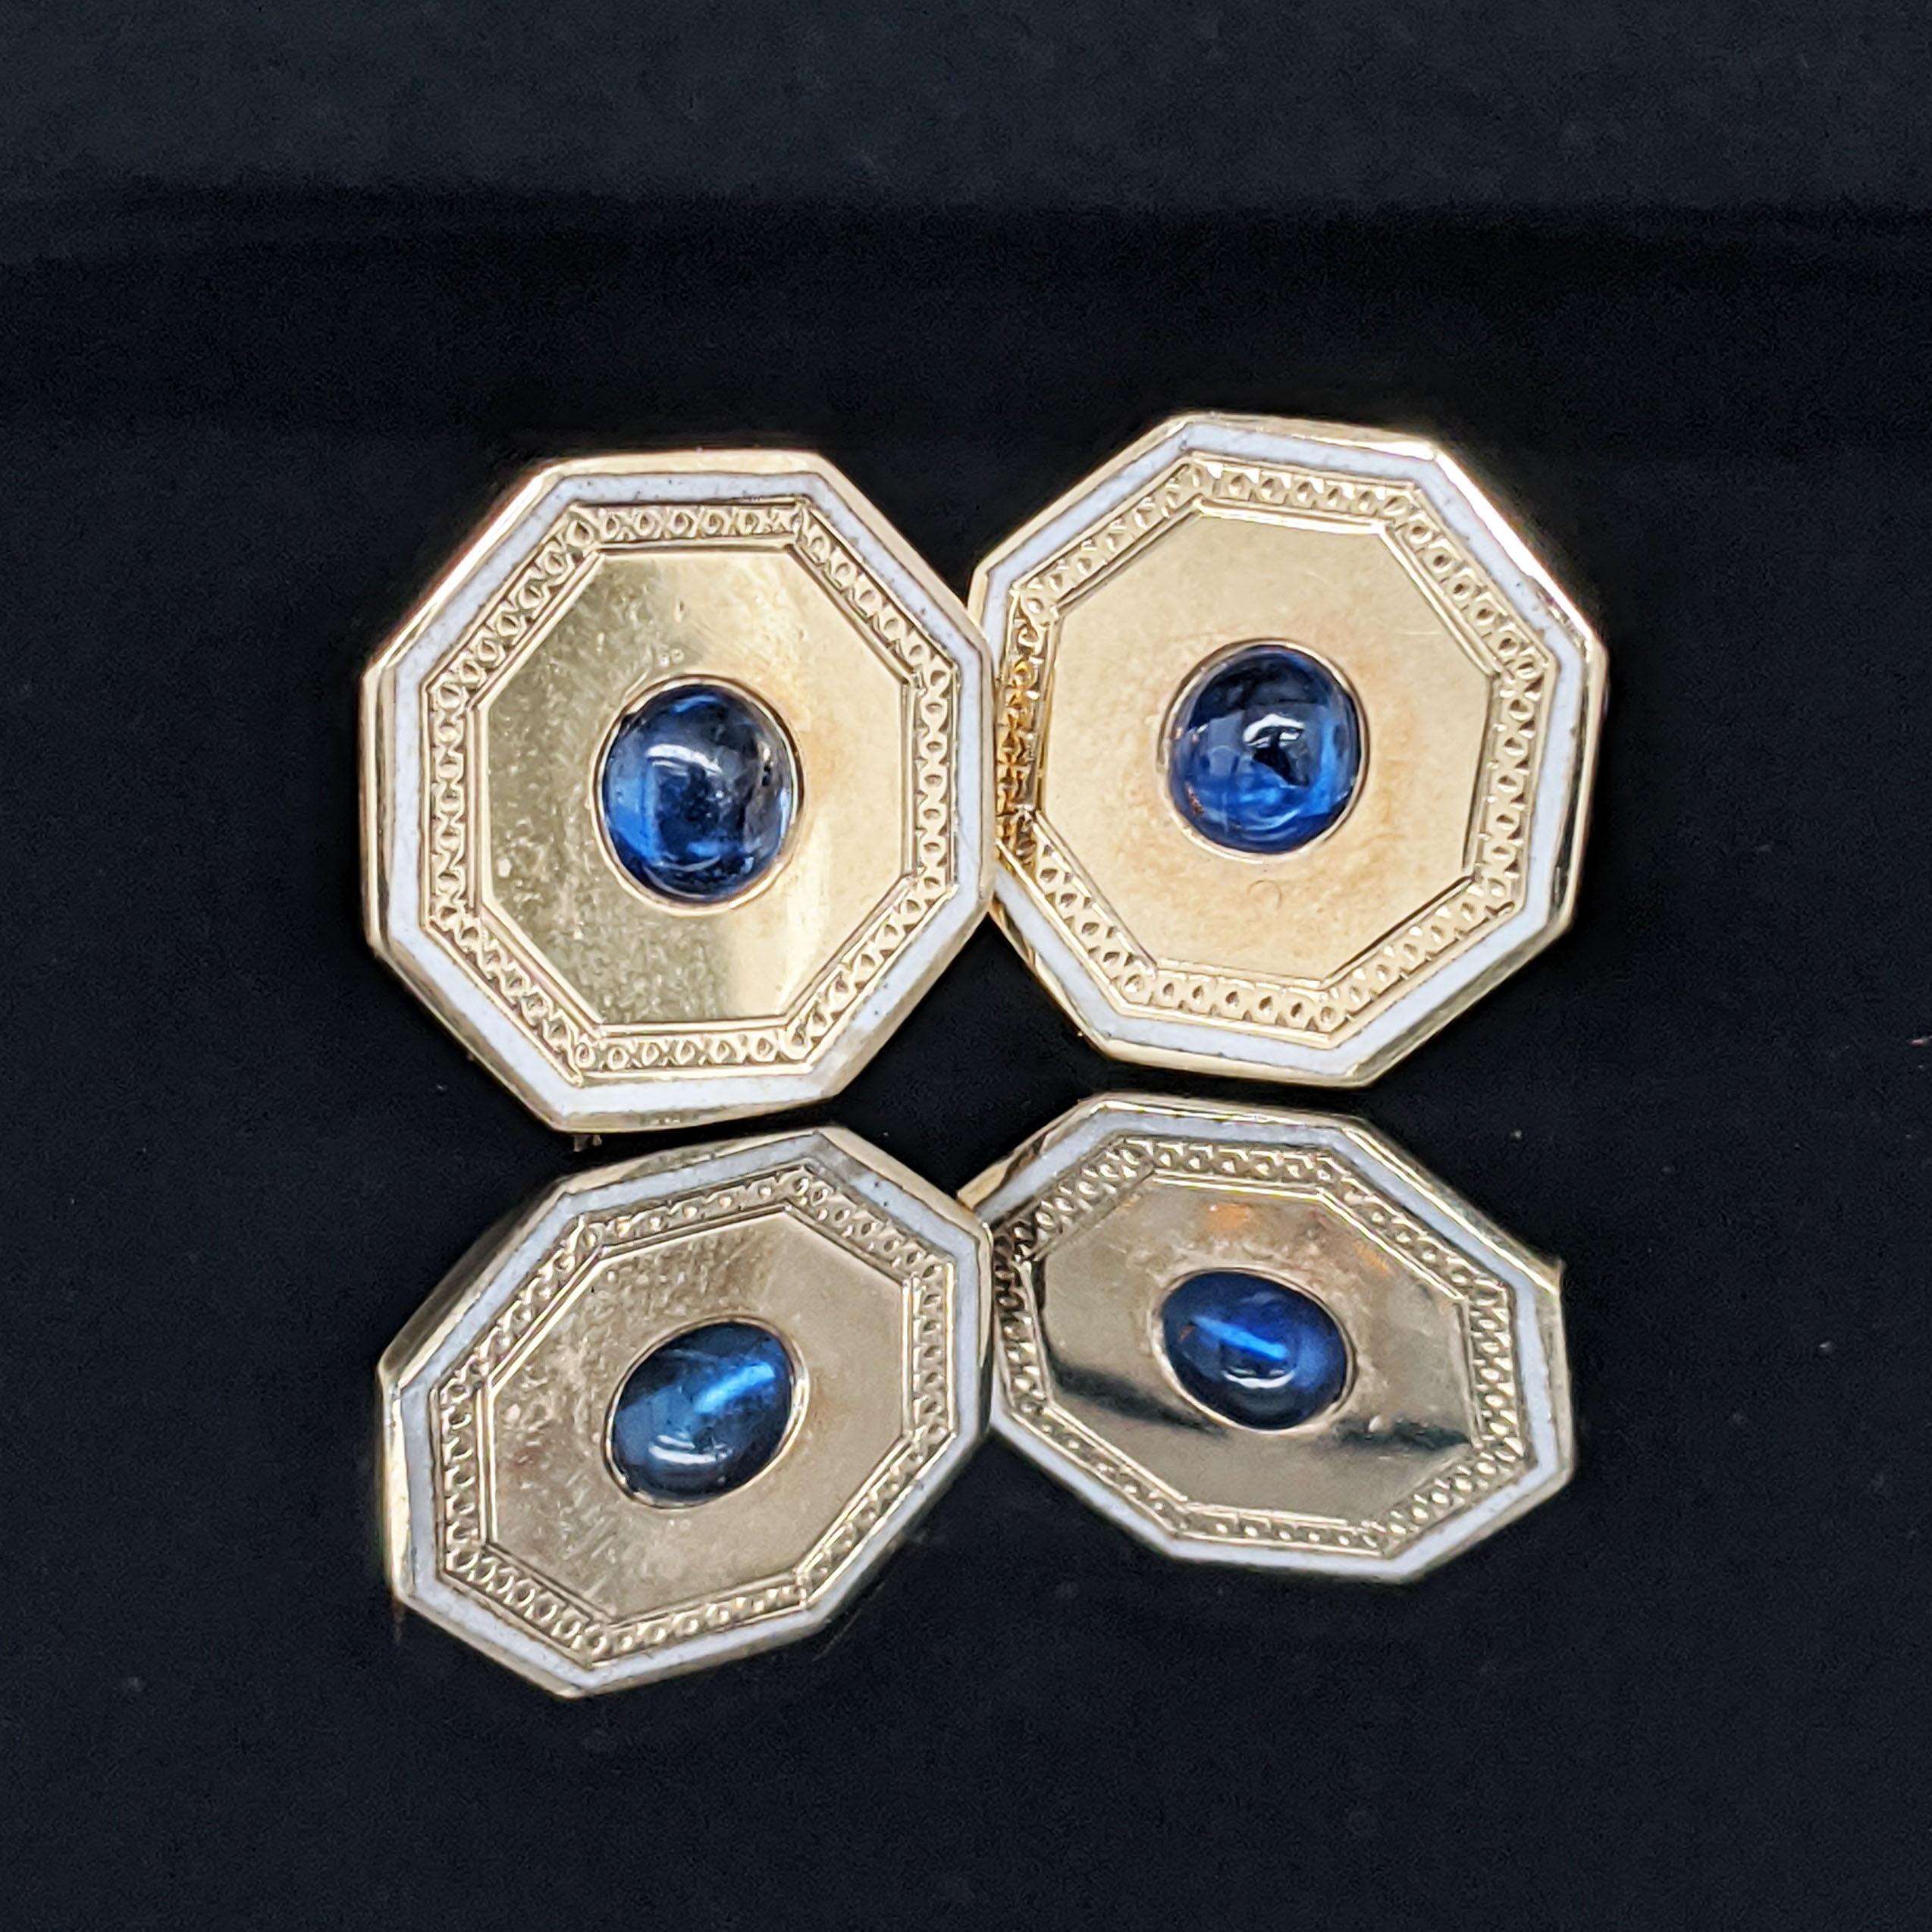 This is an awesome pair of vintage estate earrings in 14k yellow gold with blue sapphire cabochon centers that were converted from a set of cufflinks! The earrings have a slim octagonal shape with a finely engraved border detail of off white enamel.